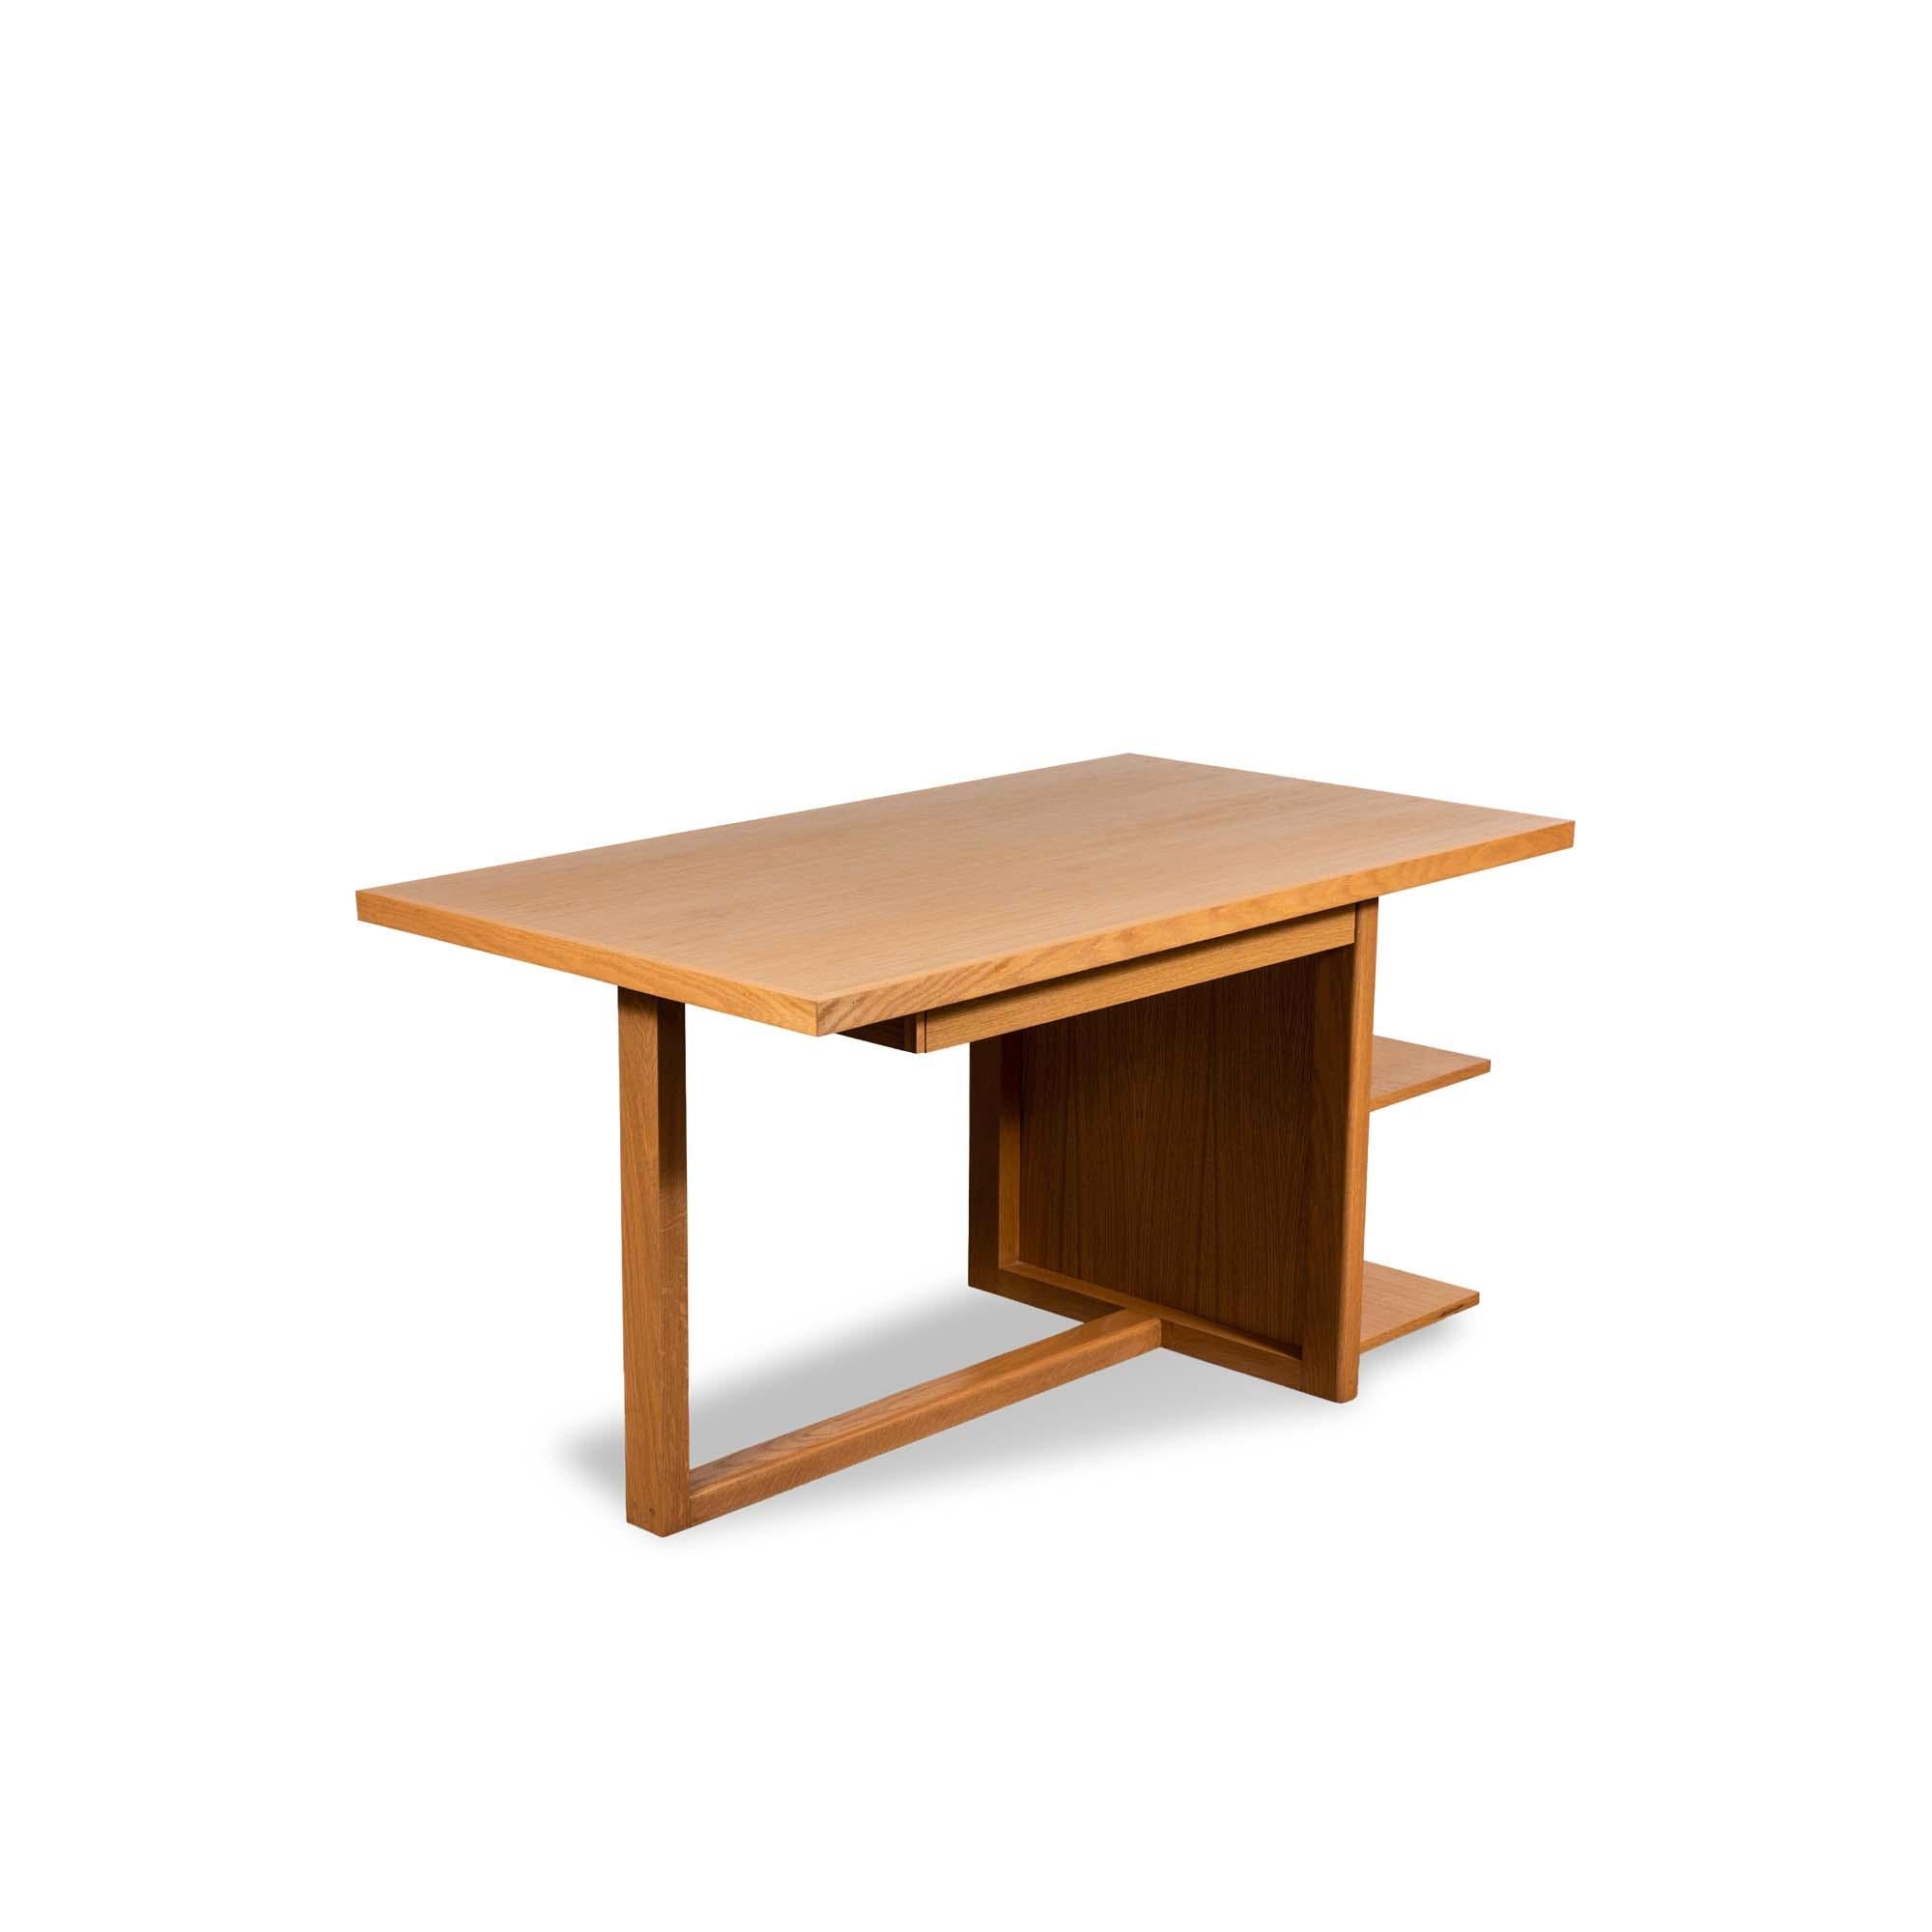 The Ivanhoe desk features a cantilevered base with open display shelves. Available in American walnut or white oak and drawers are available upon request. 

The Lawson-Fenning Collection is designed and handmade in Los Angeles, California. Reach out